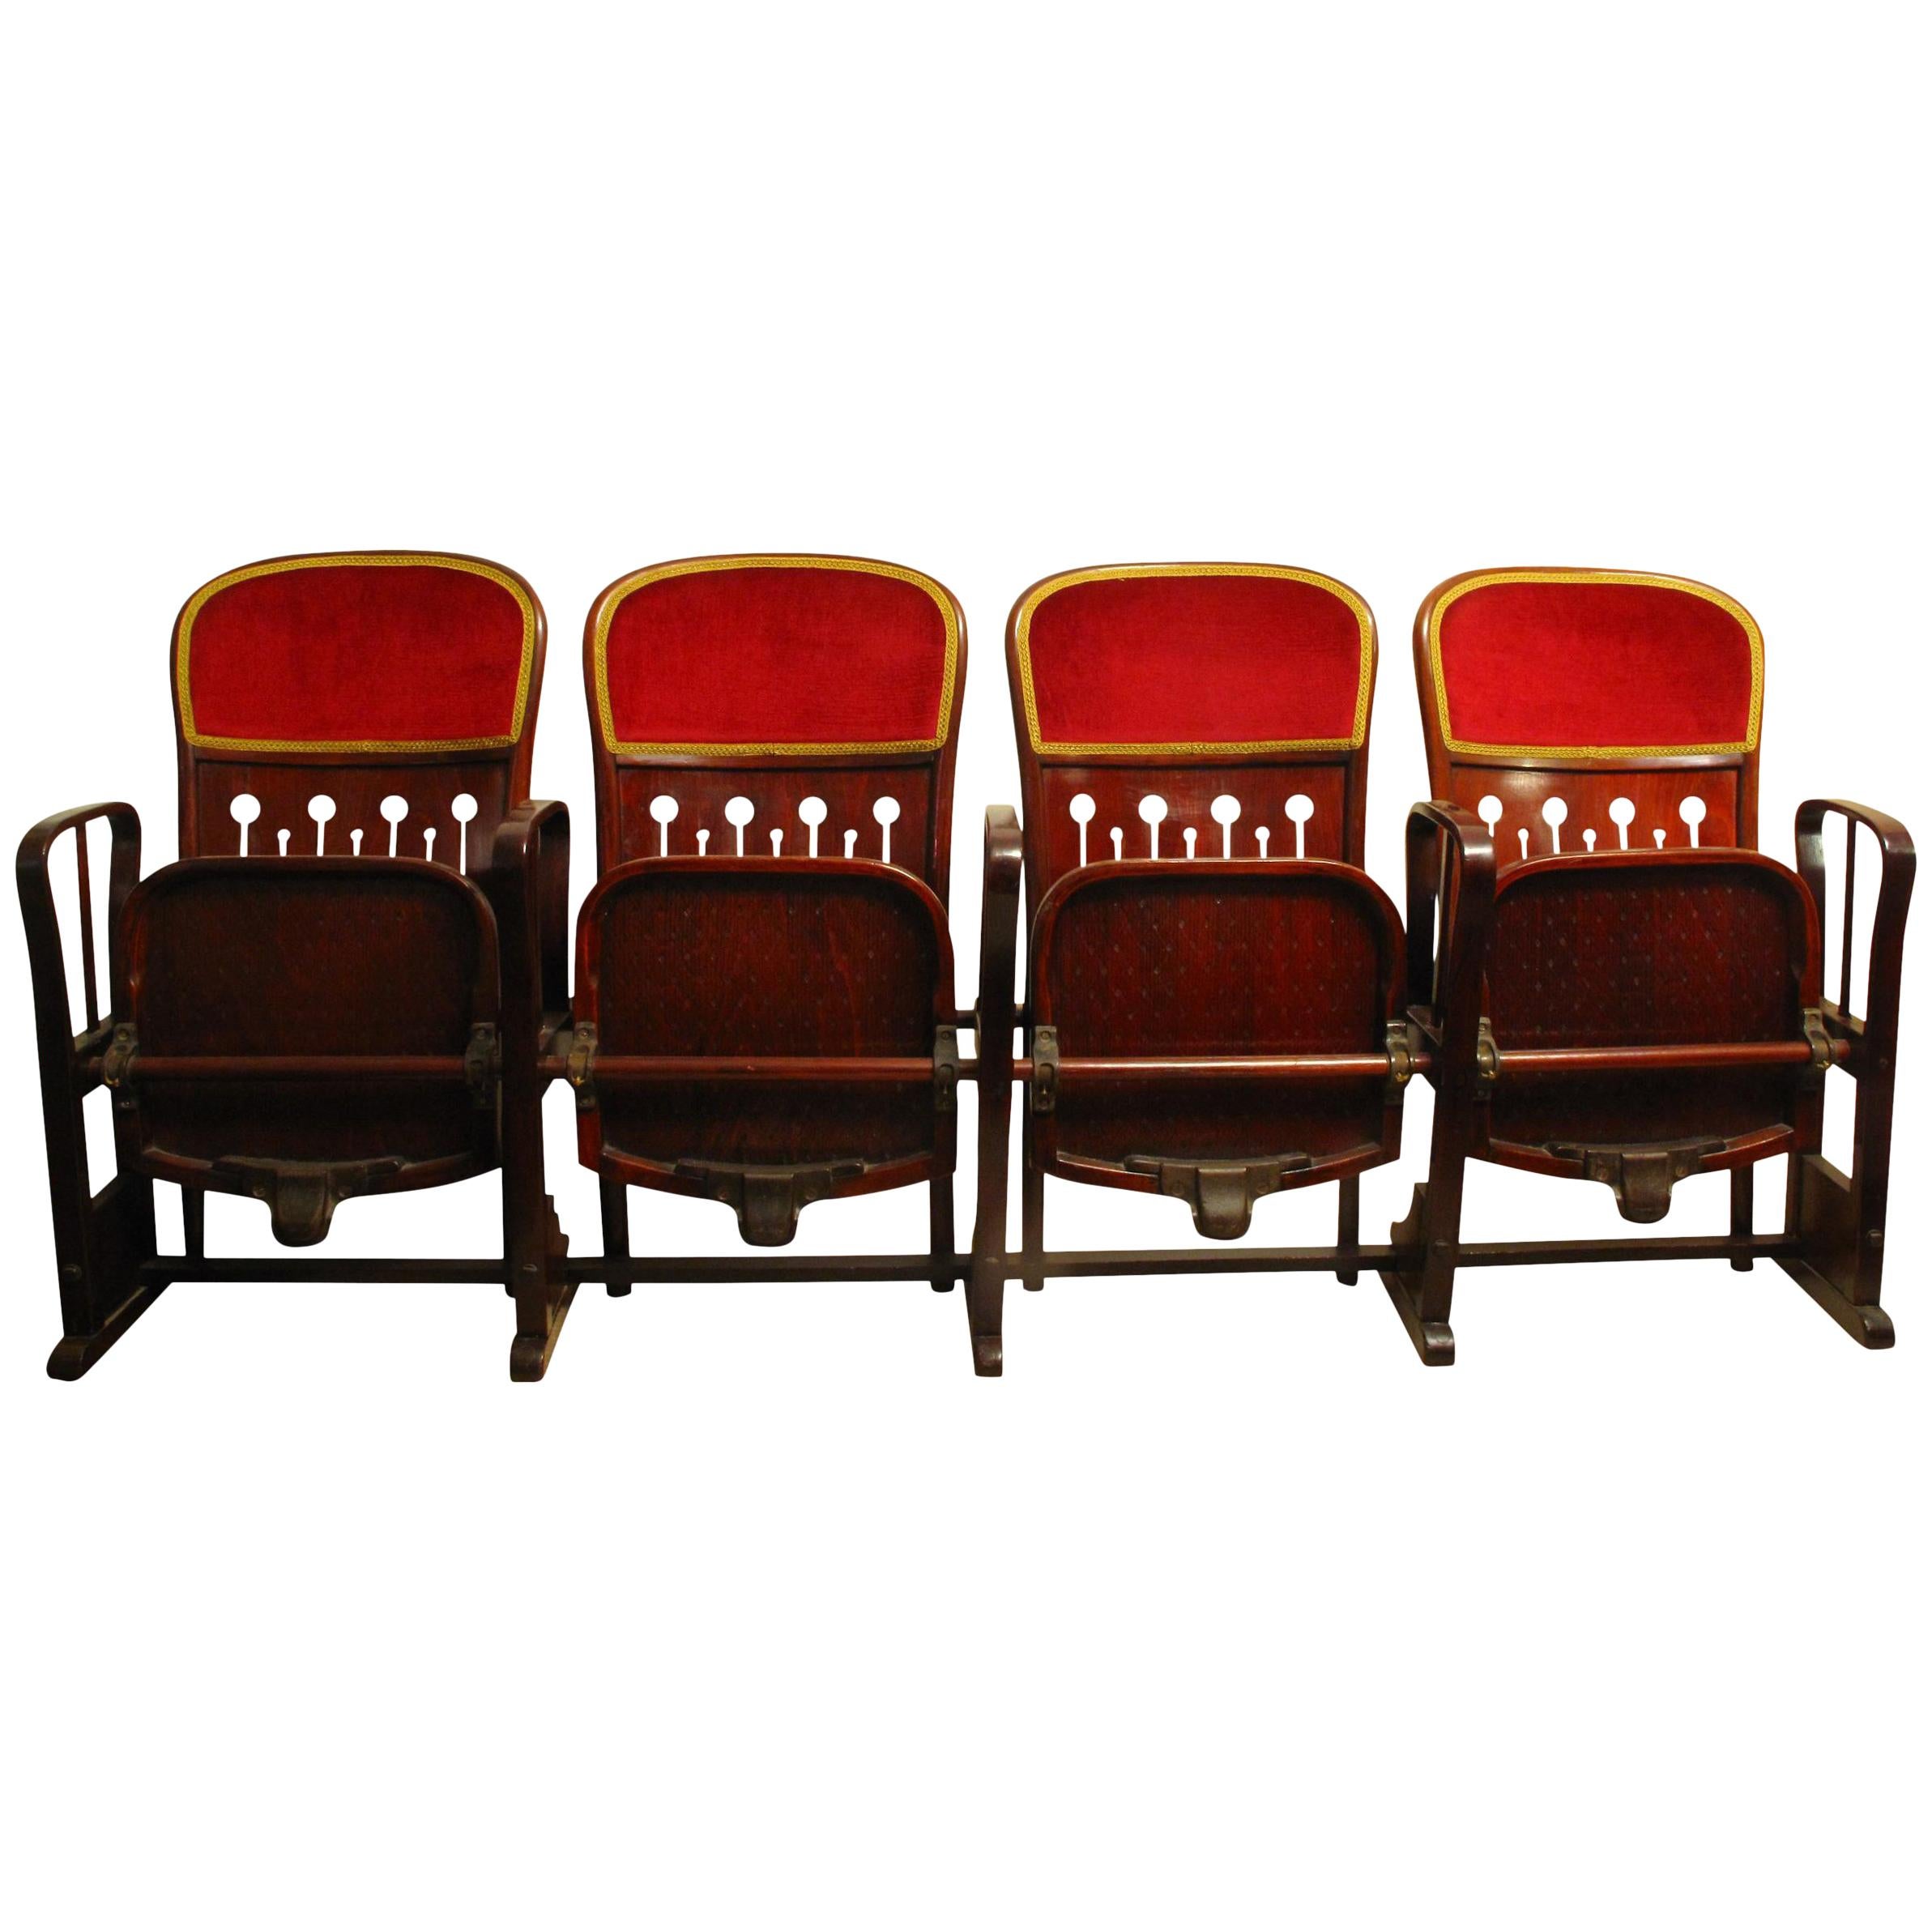 Row of Four Bentwood Viennese Theatre Chairs by Thonet, circa 1907 For Sale